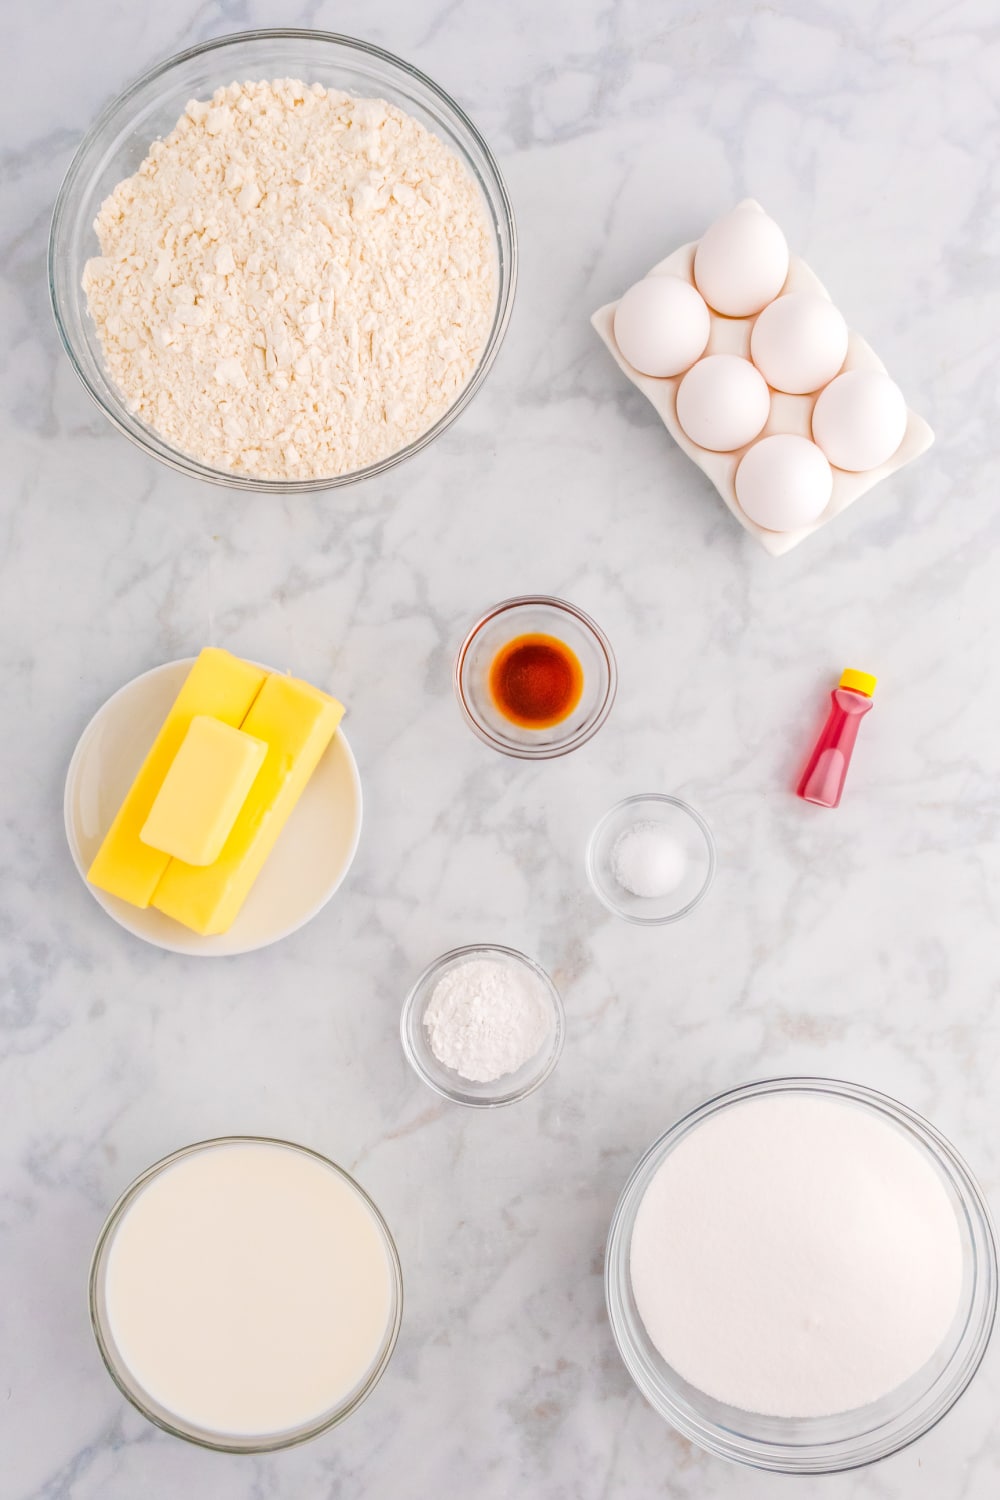 Measured ingredients needed to make a yellow sheet cake presented on a white marble countertop.